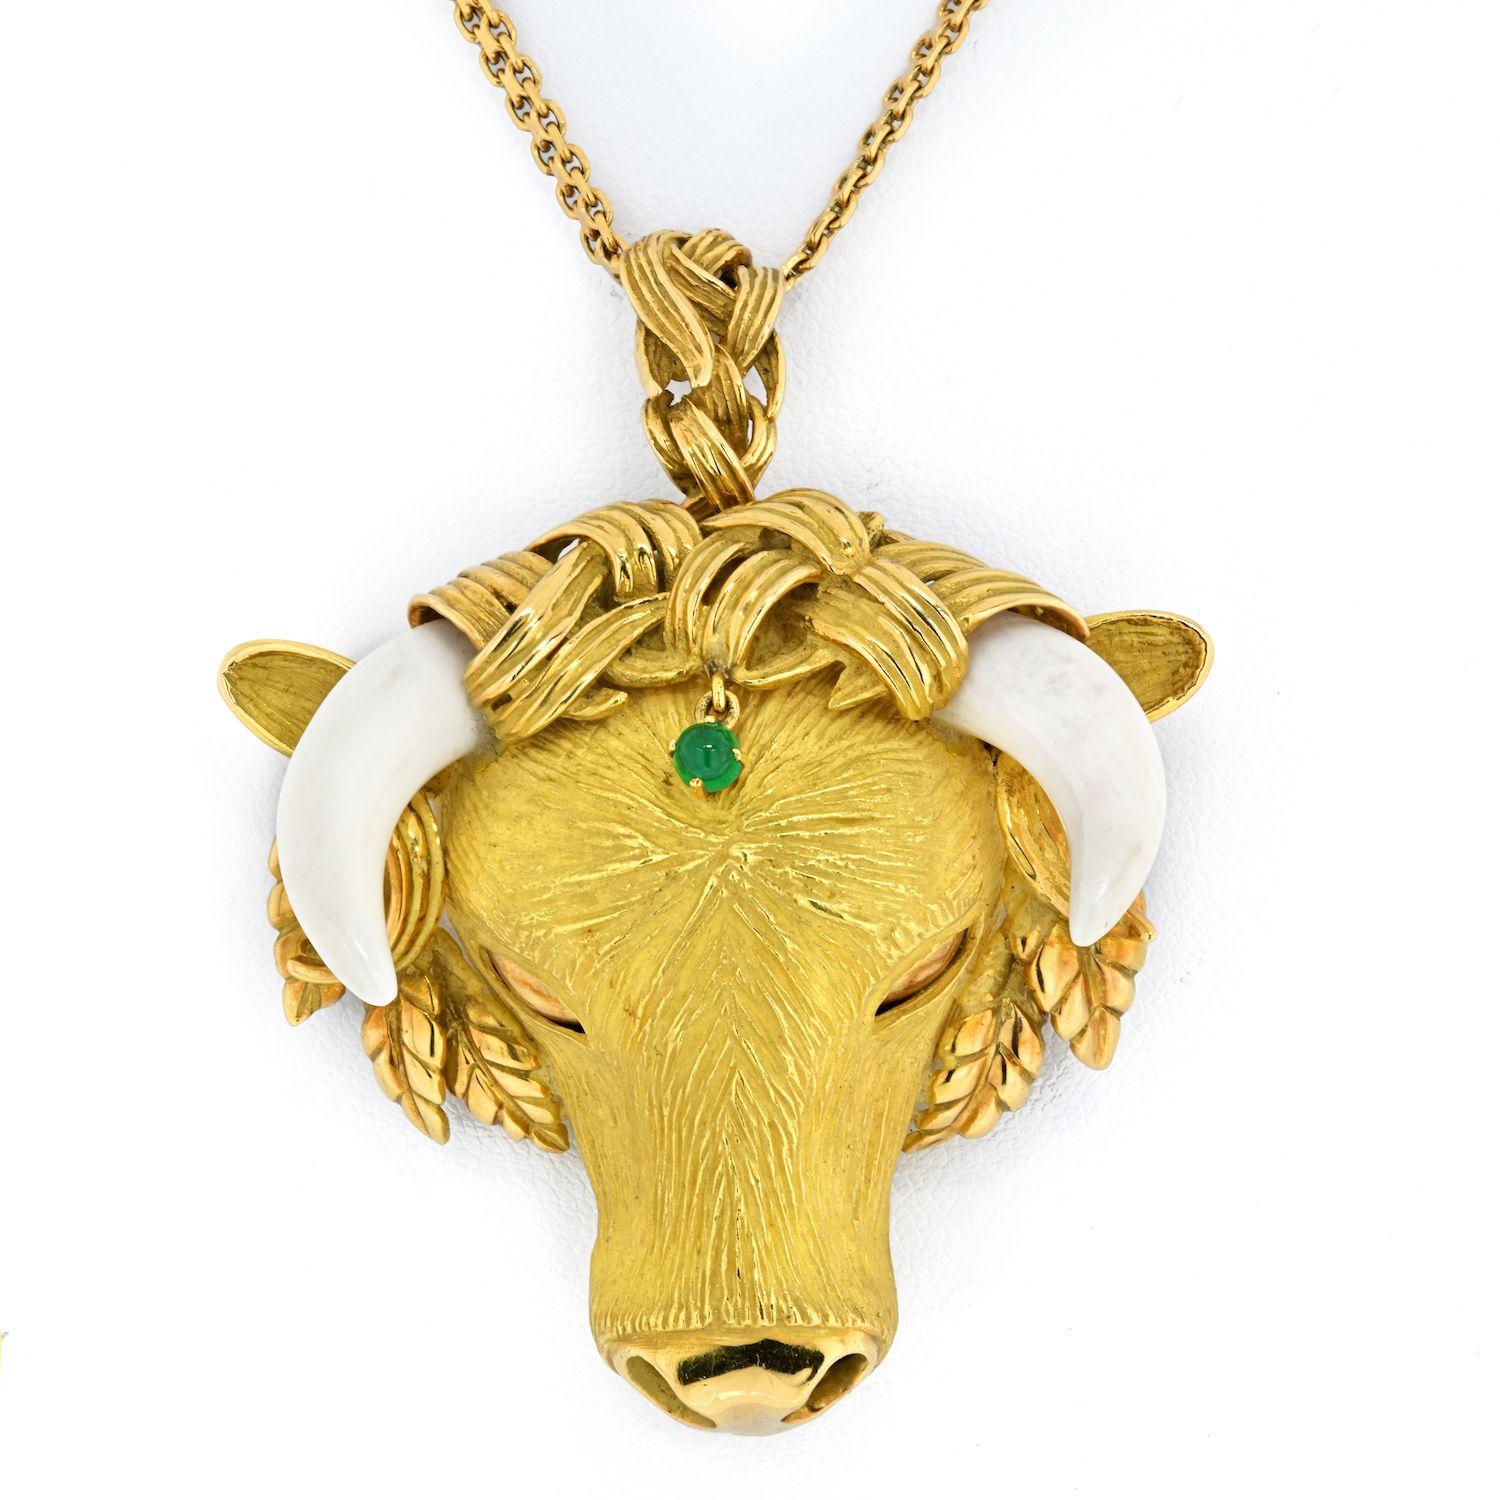 Very exquisite Bull pendant that converts into a brooch is designed in 18 karat yellow gold. The estate piece has natural ivory horns and emerald dangle from headdress. It is enhanced by beautiful polished leaves, polished nose and eyes. 

The head